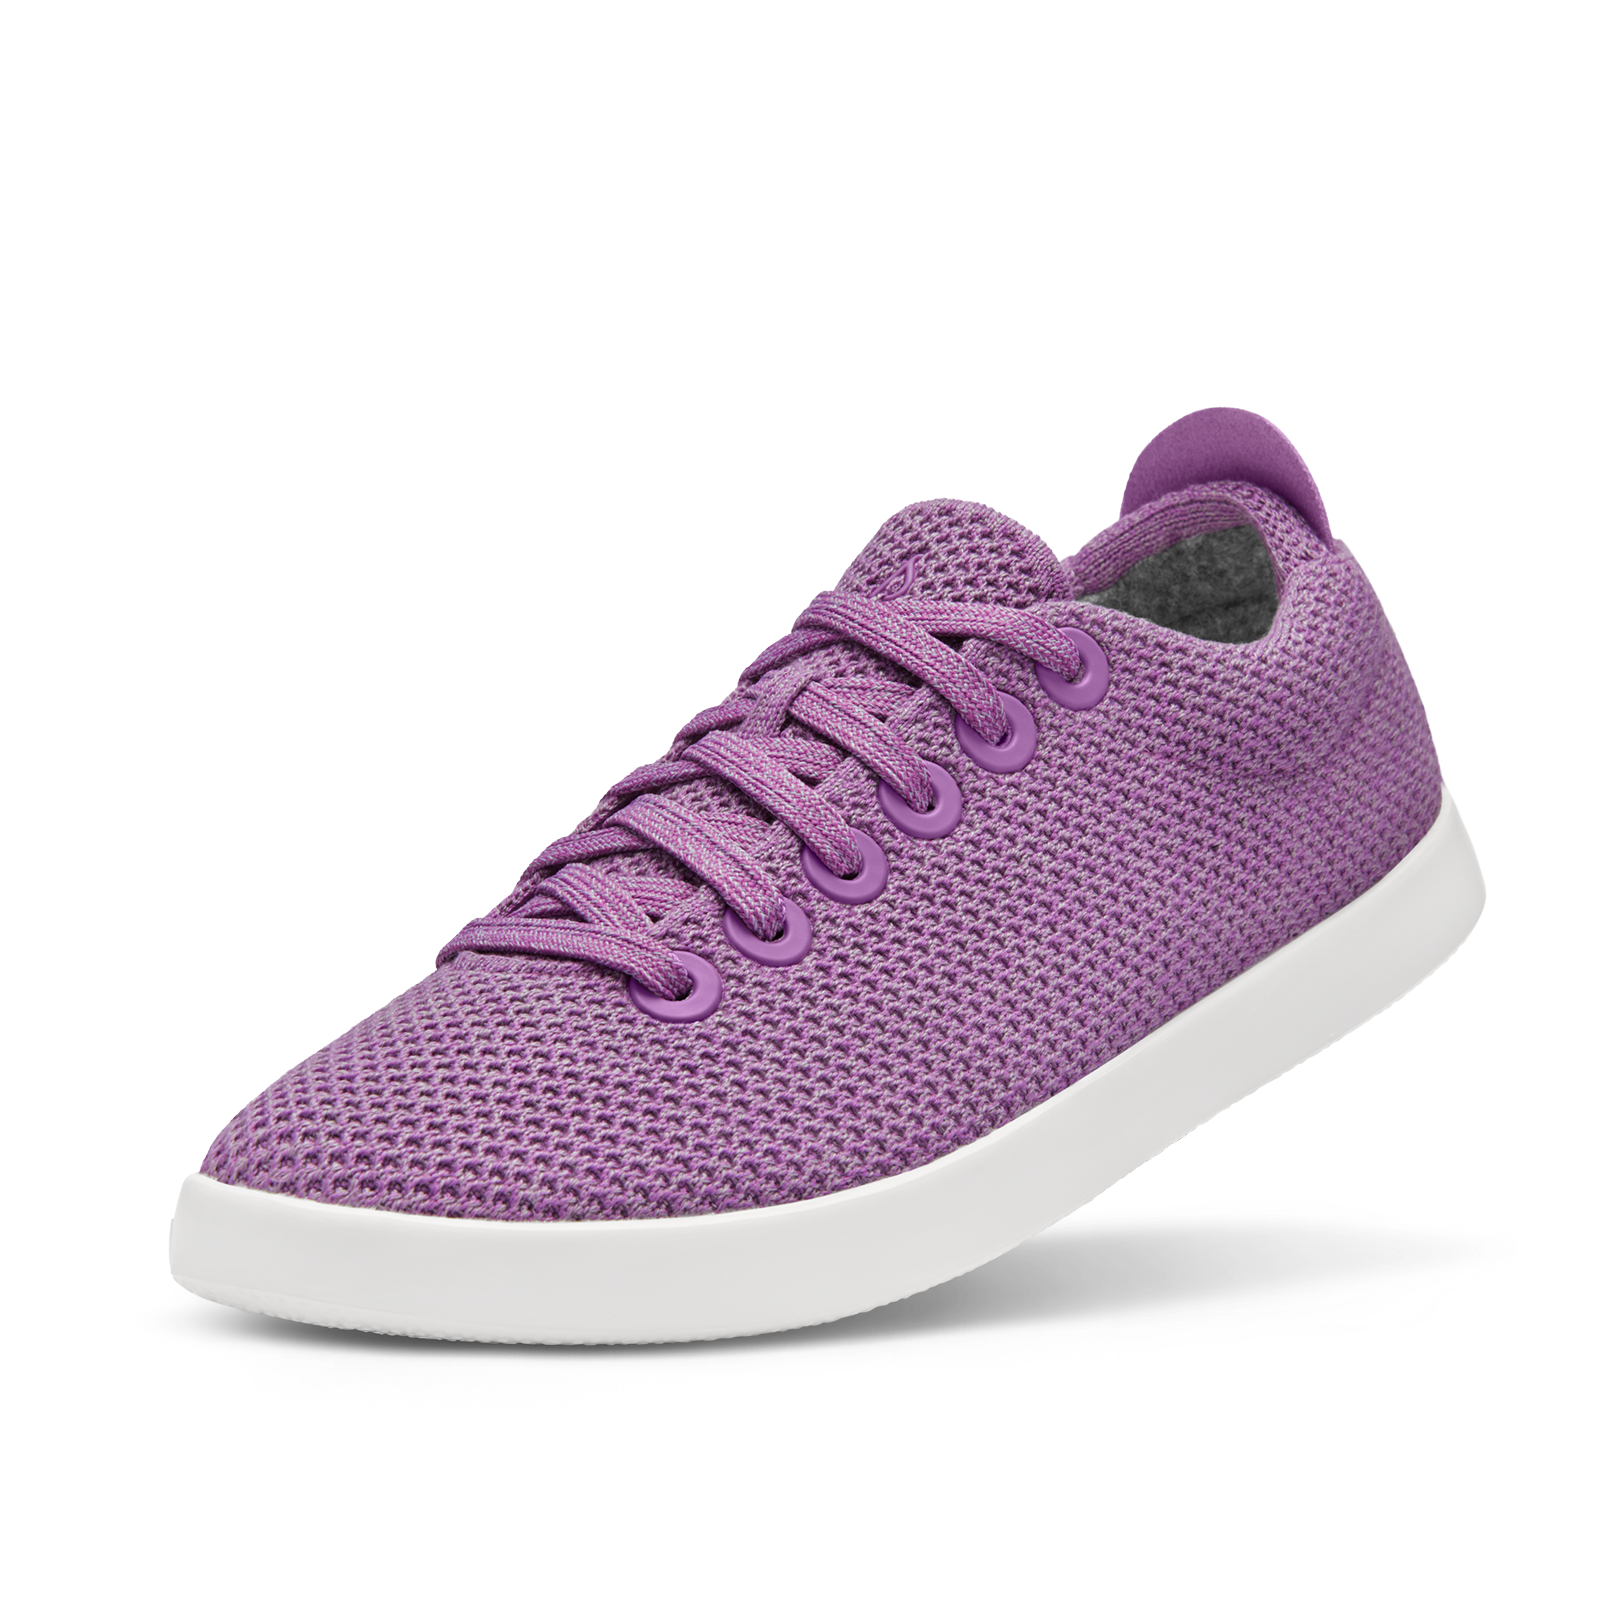 Allbirds Men's Tree Pipers, Lux Purple product